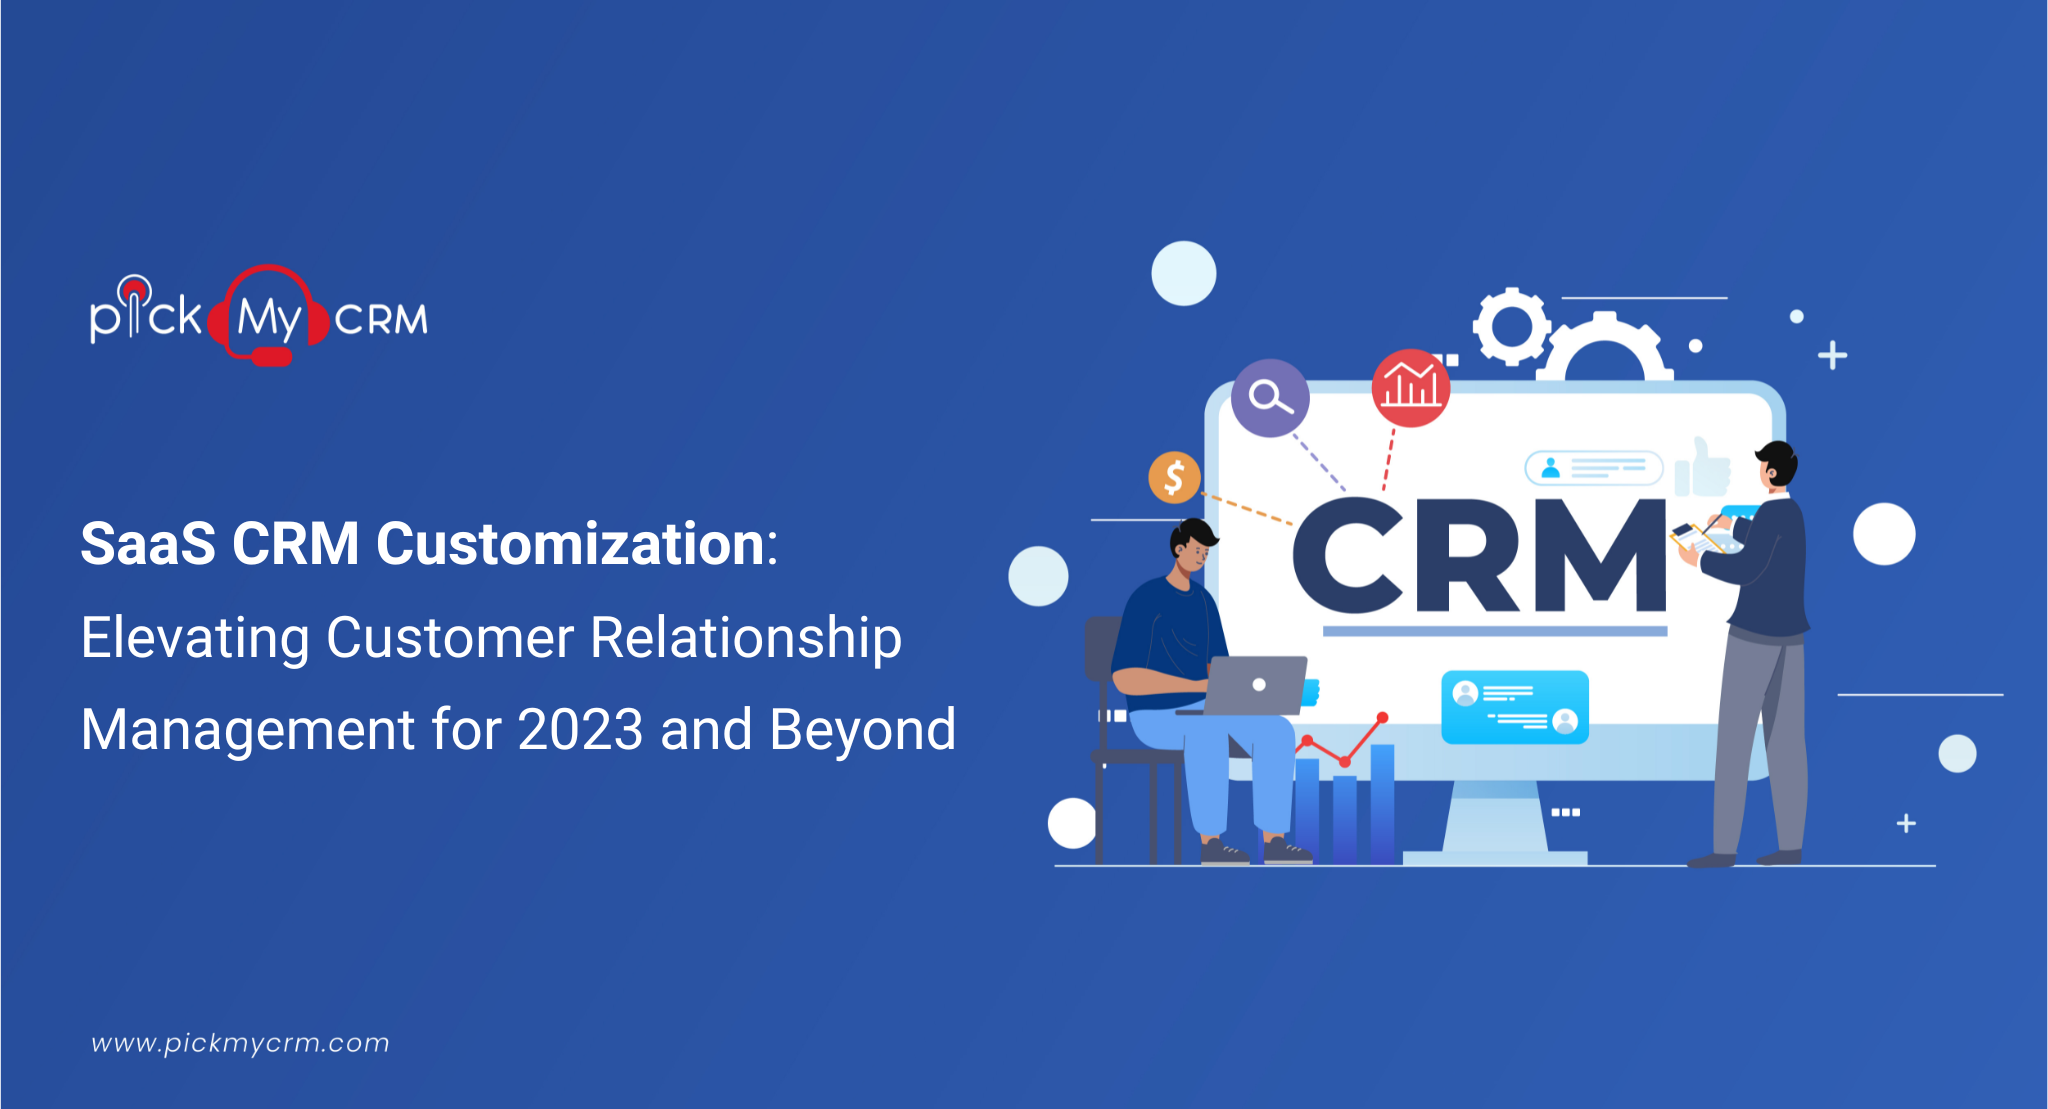 SaaS CRM Customization: Elevating Customer Relationship Management for 2023 and Beyond